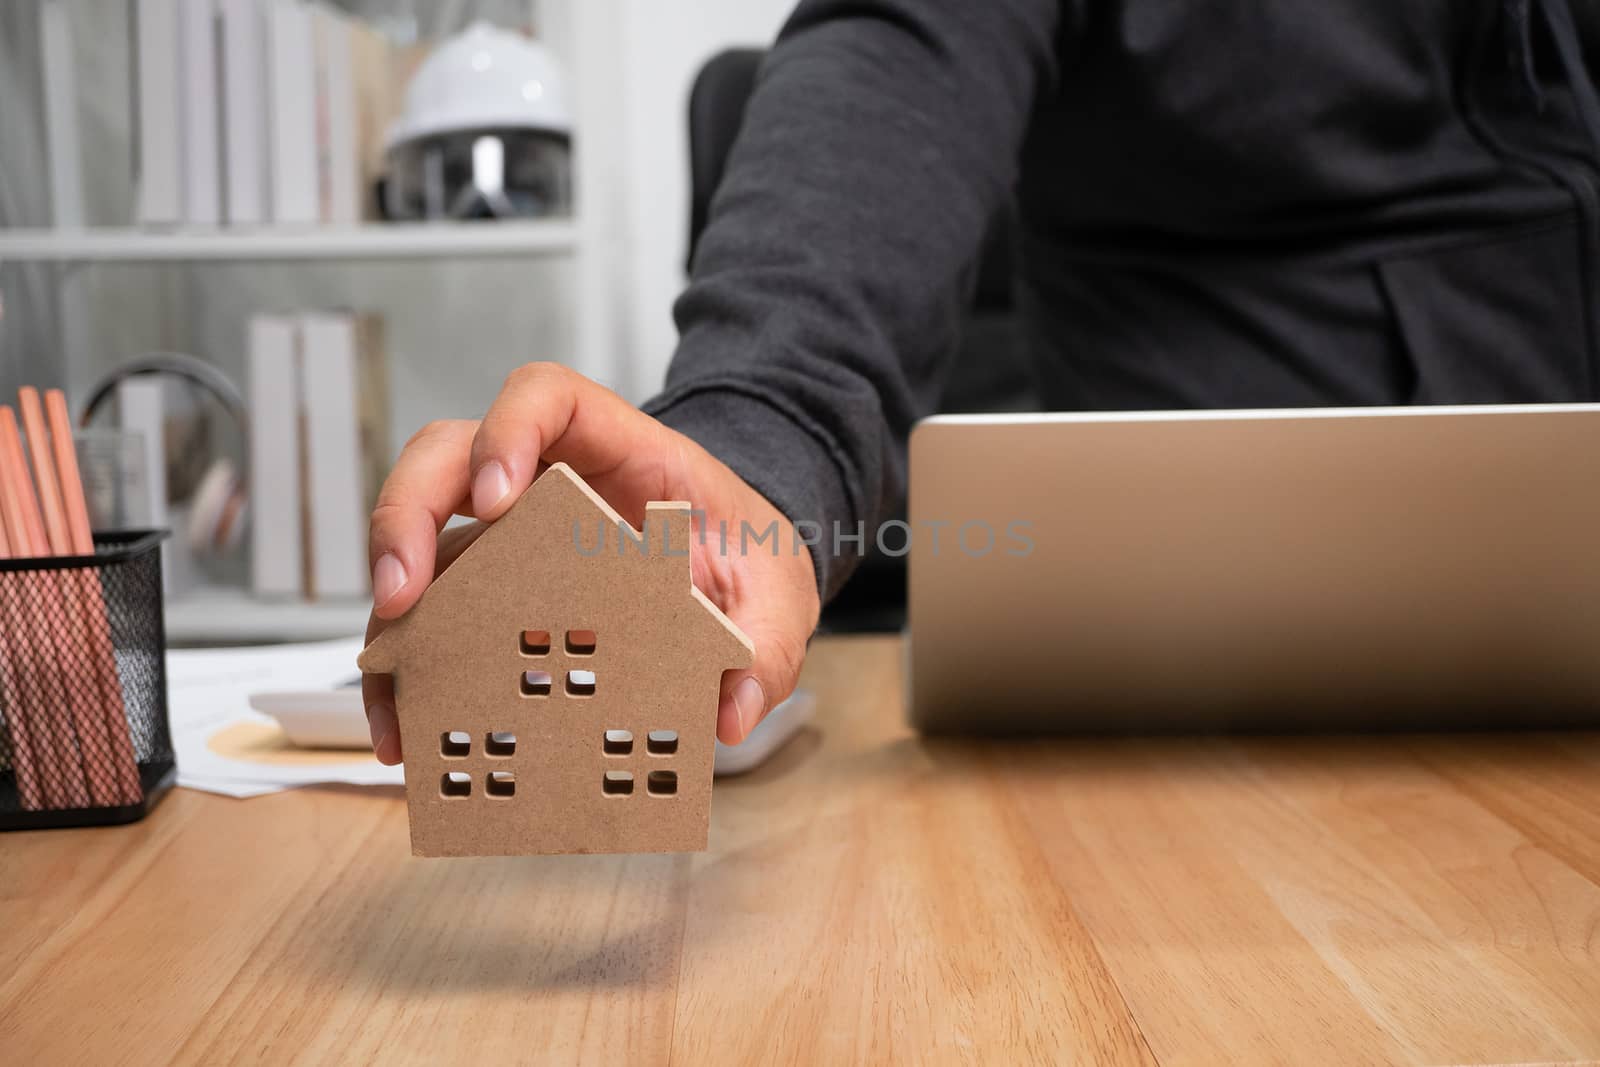 Smiling businessman holding a wooden house in home workspace. The concept of working from home until the end of Coronavirus (COVID-19) quarantine, happily freelance working lifestyle